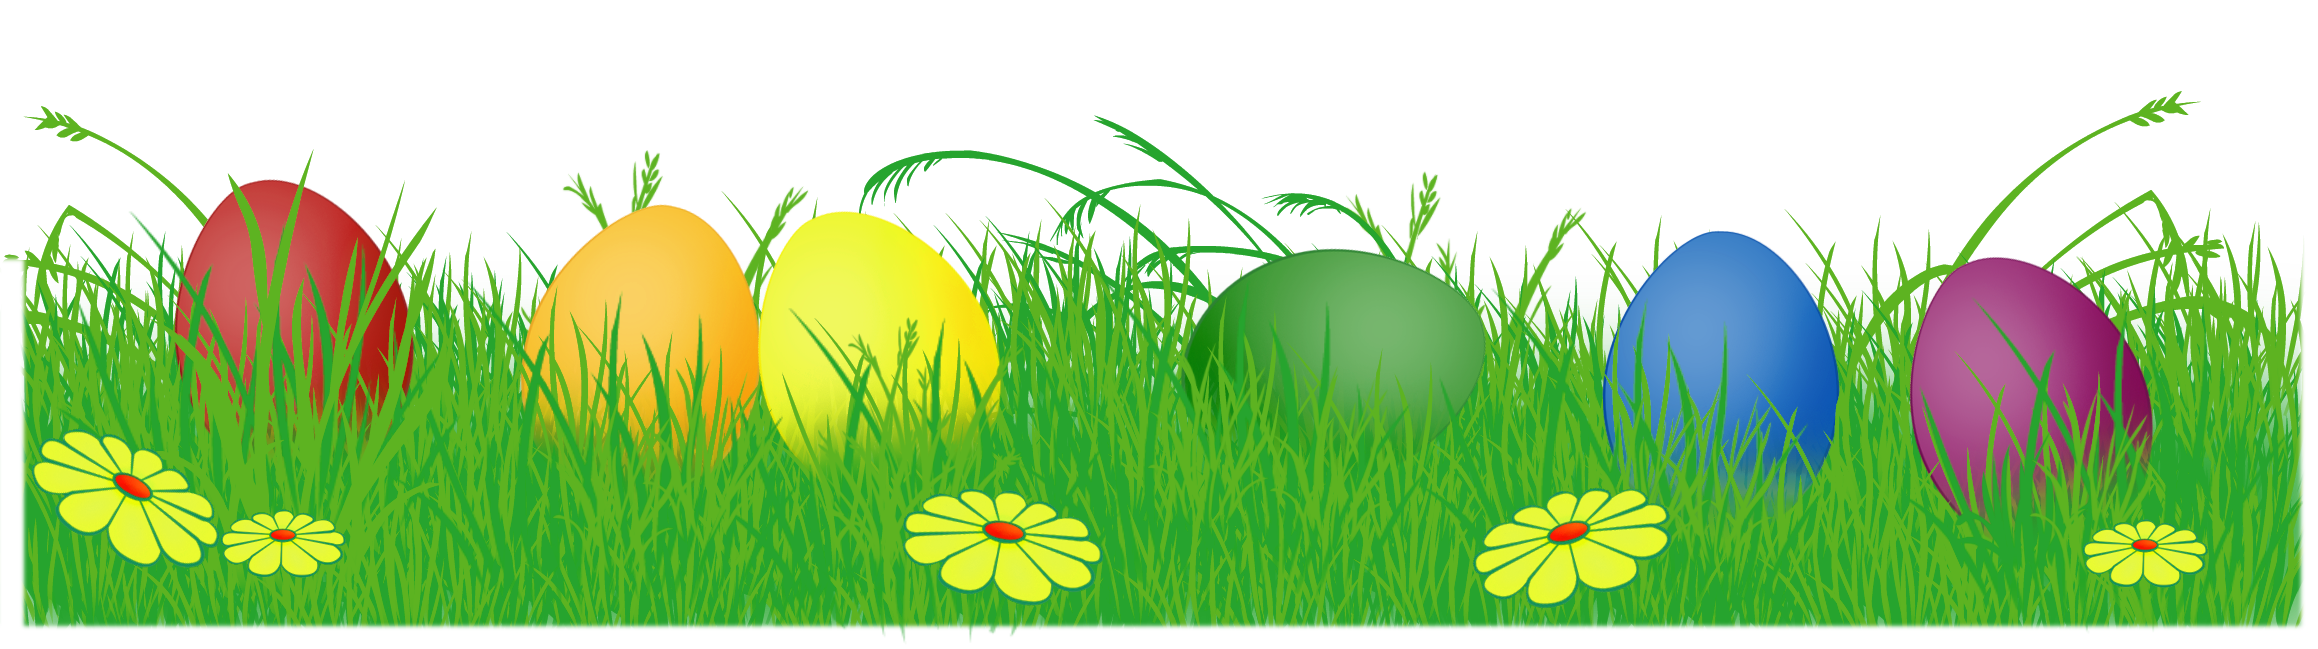 Download PNG image - Easter Eggs In Grass PNG 